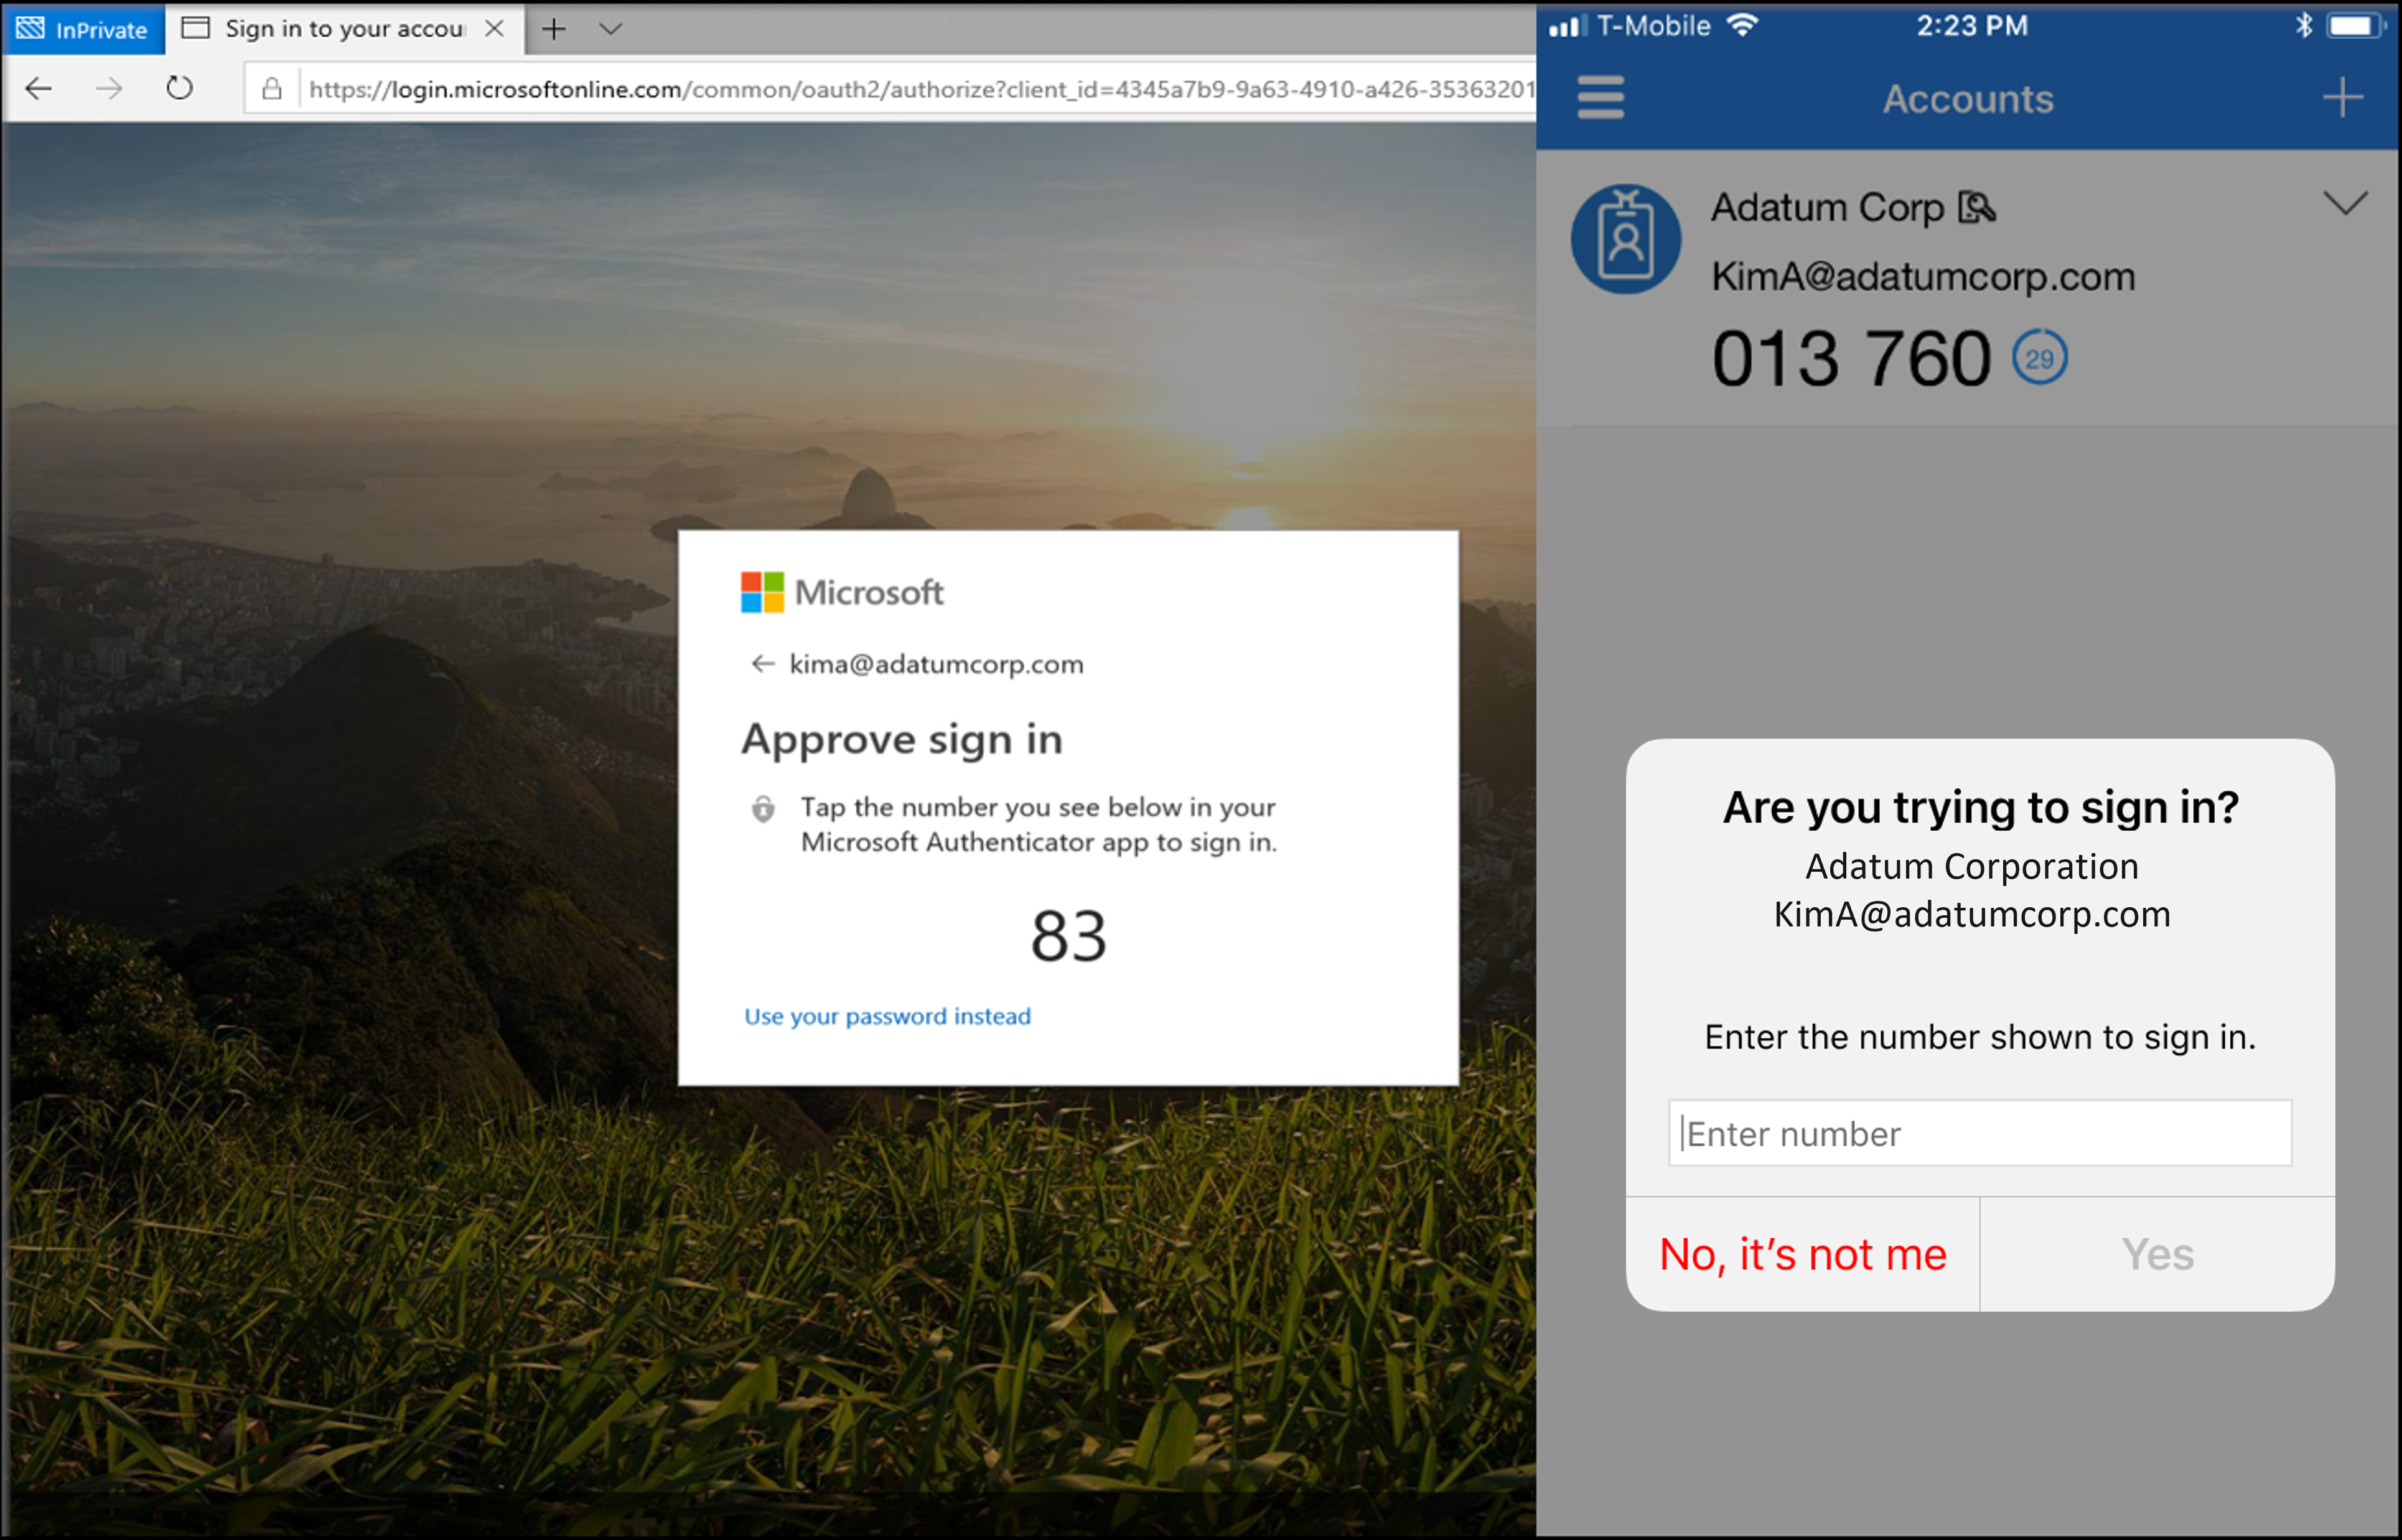 Screen capture of Microsoft authenticator sign-in request